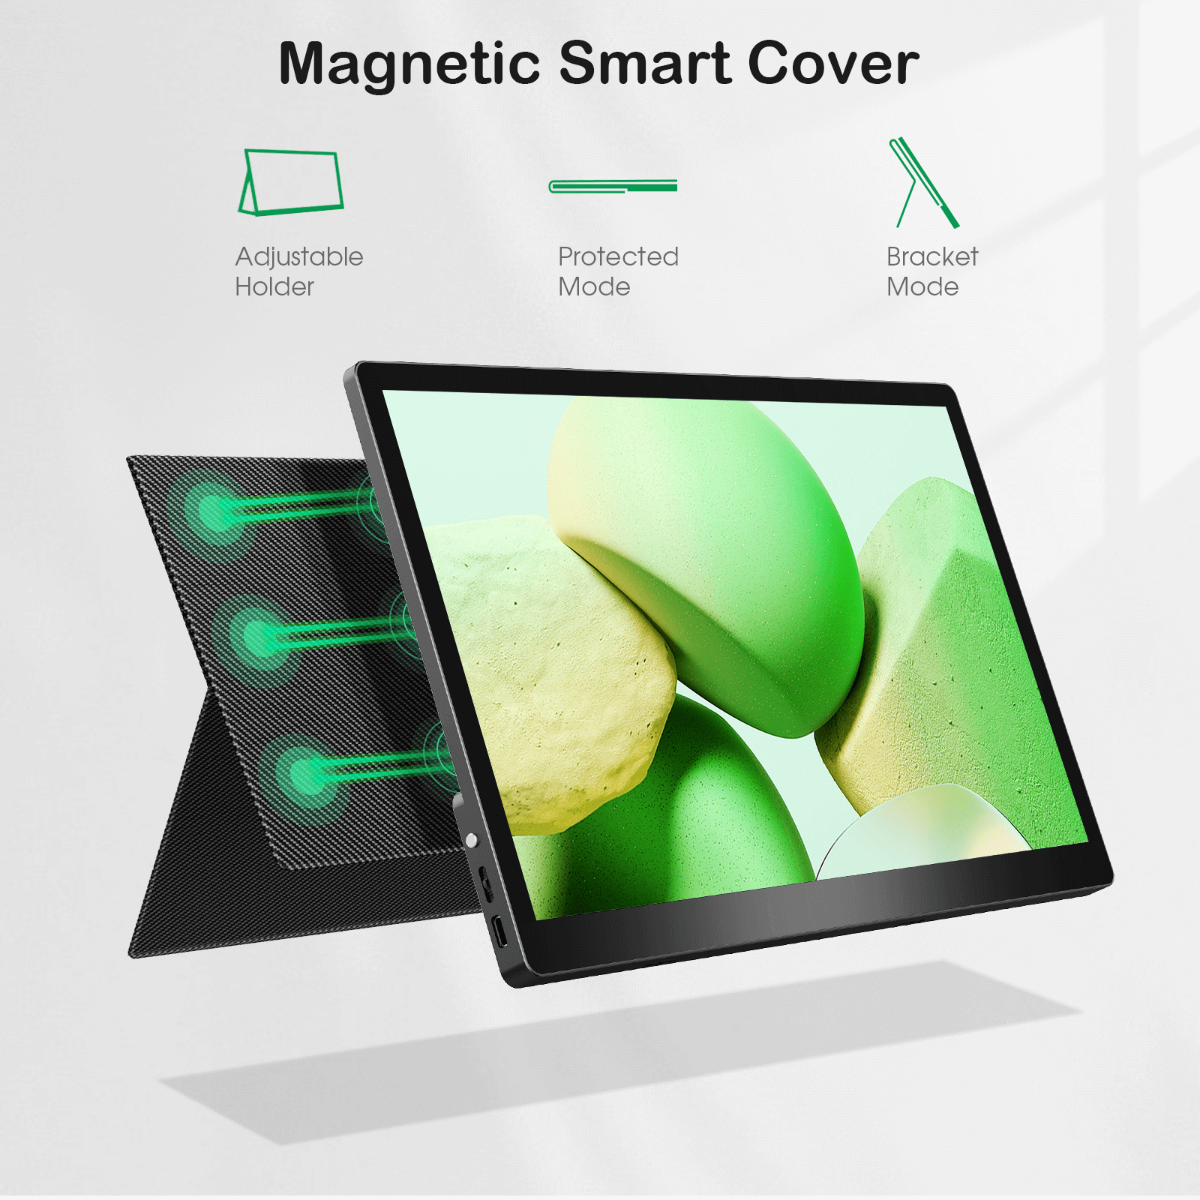 15.6 inch portable monitor with magnetic cover